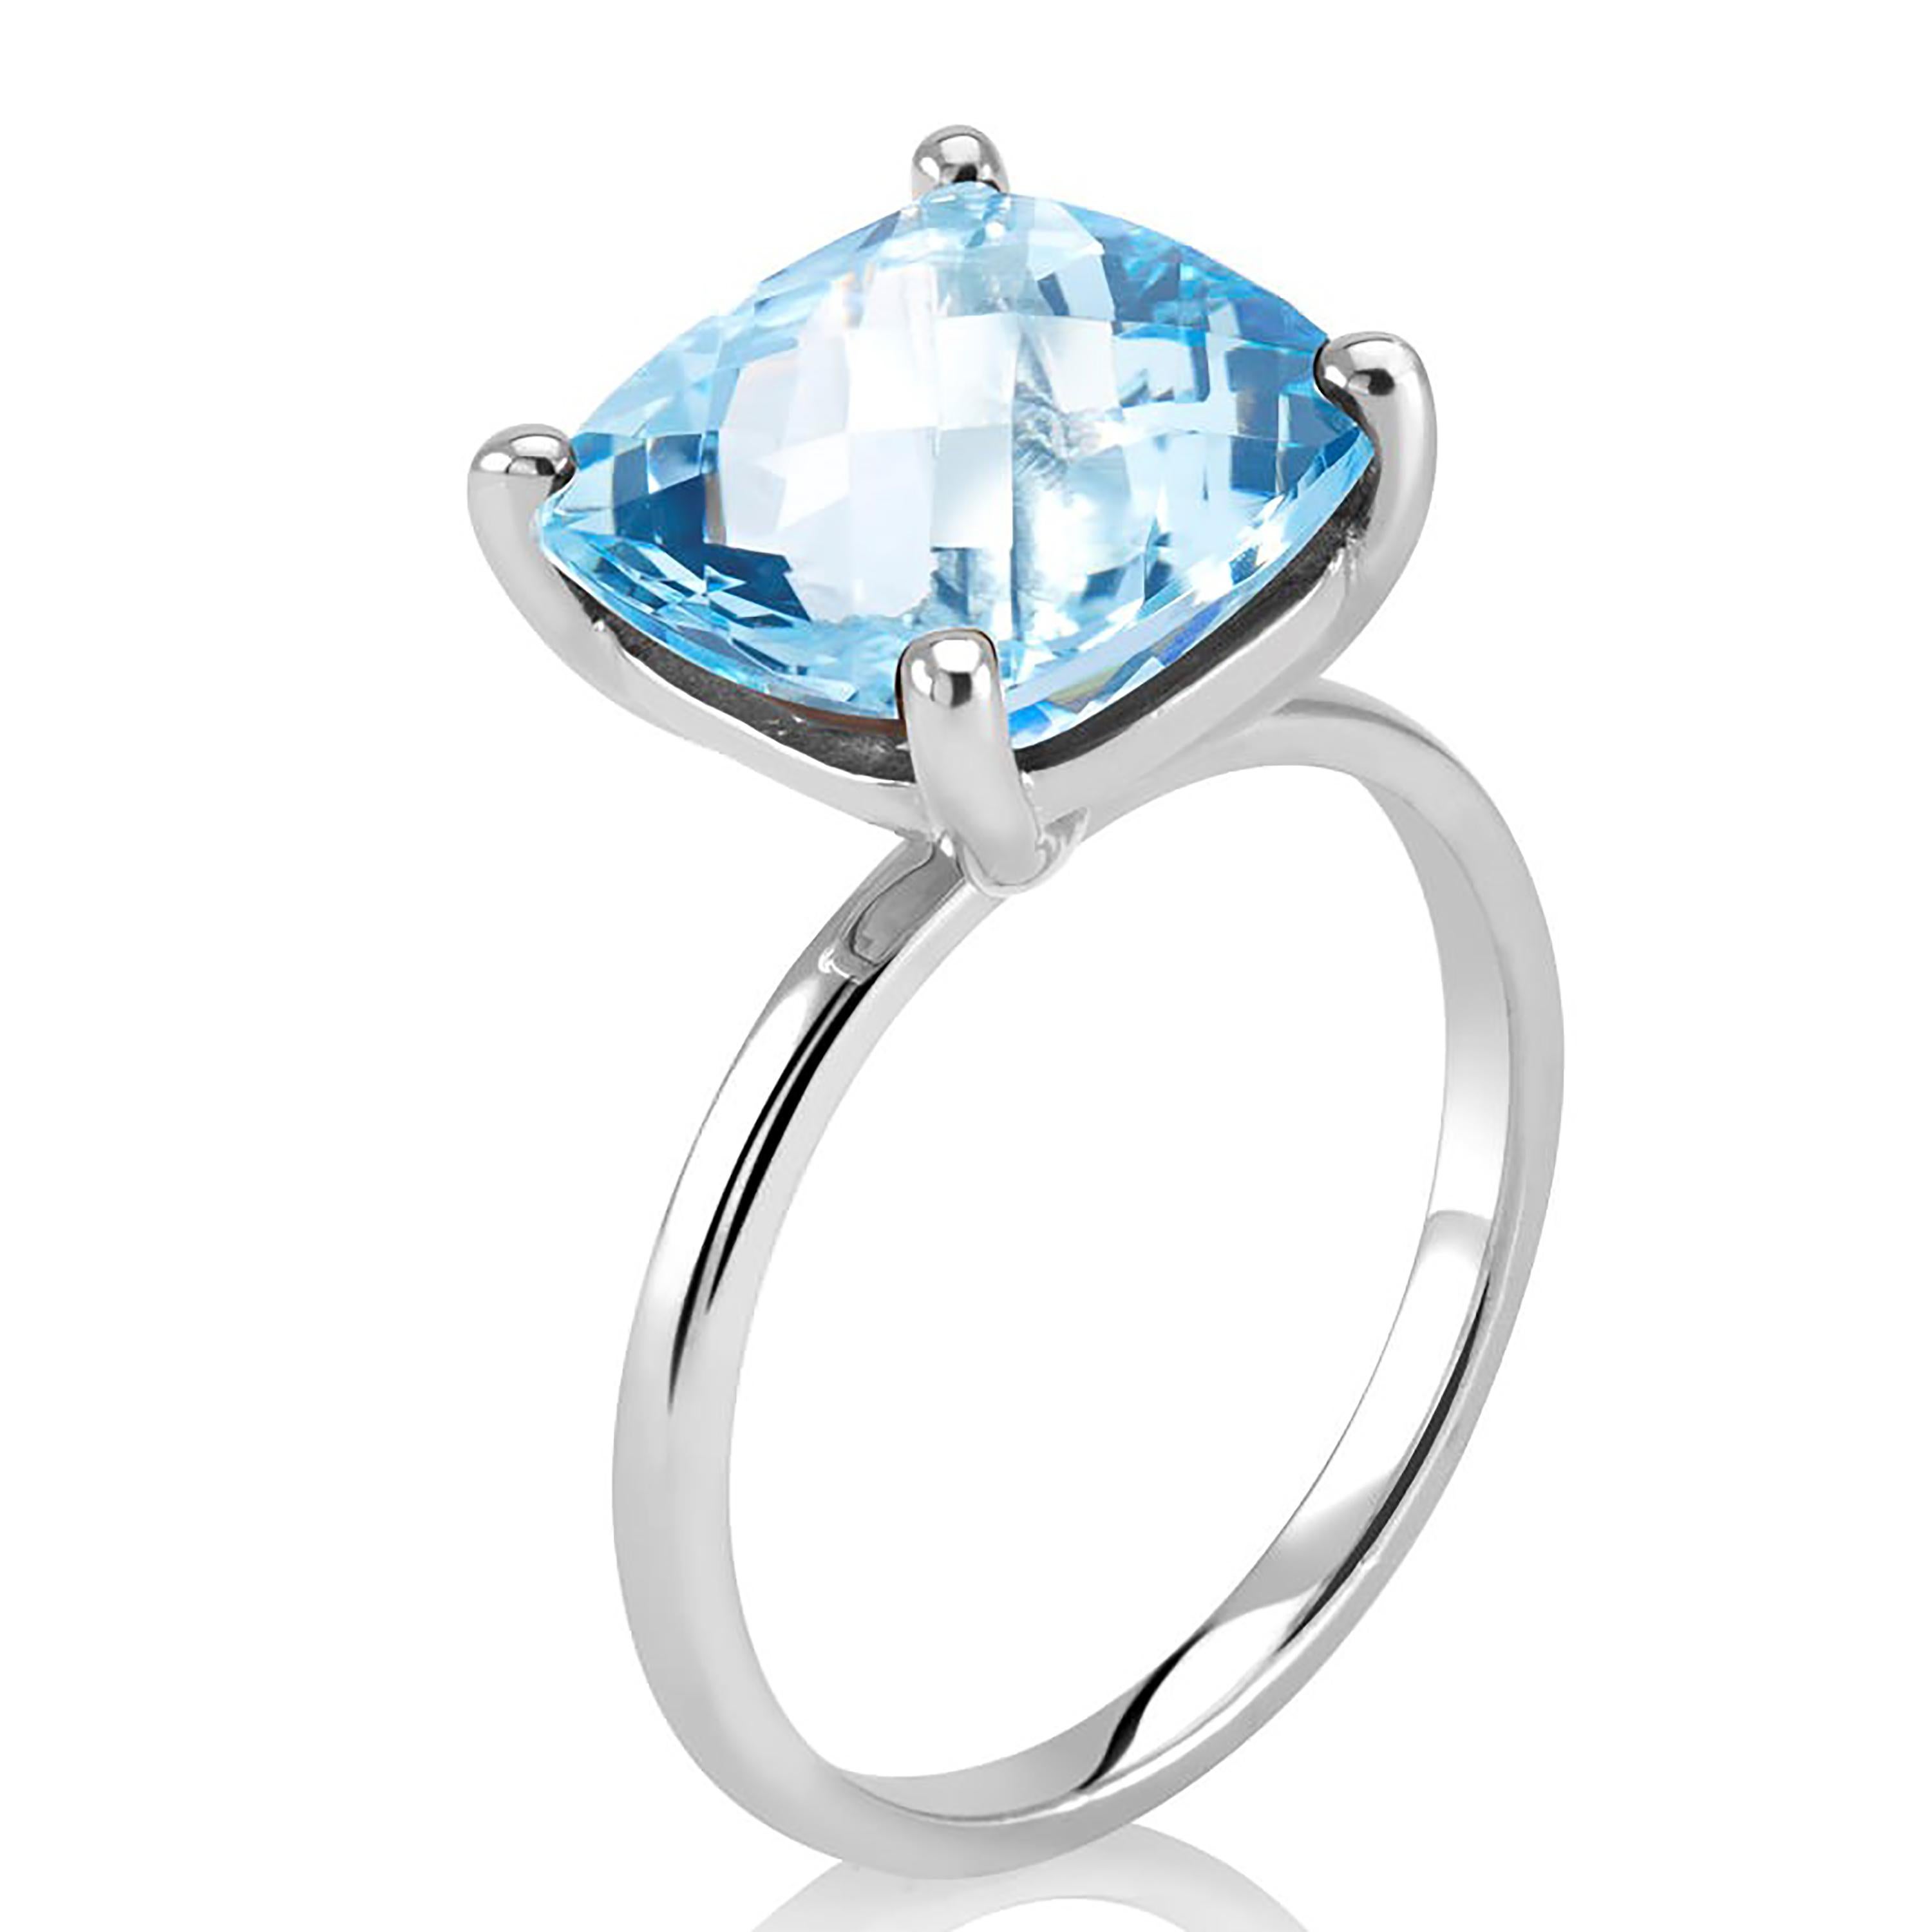 Sterling Silver Solitaire ring 
Cushion shaped blue topaz weighing 4 carat
Blue Topaz measuring 10 millimeter 
Ring finger size 6
New Ring
The ring cannot be resized
White gold plated 
Handmade in the USA
